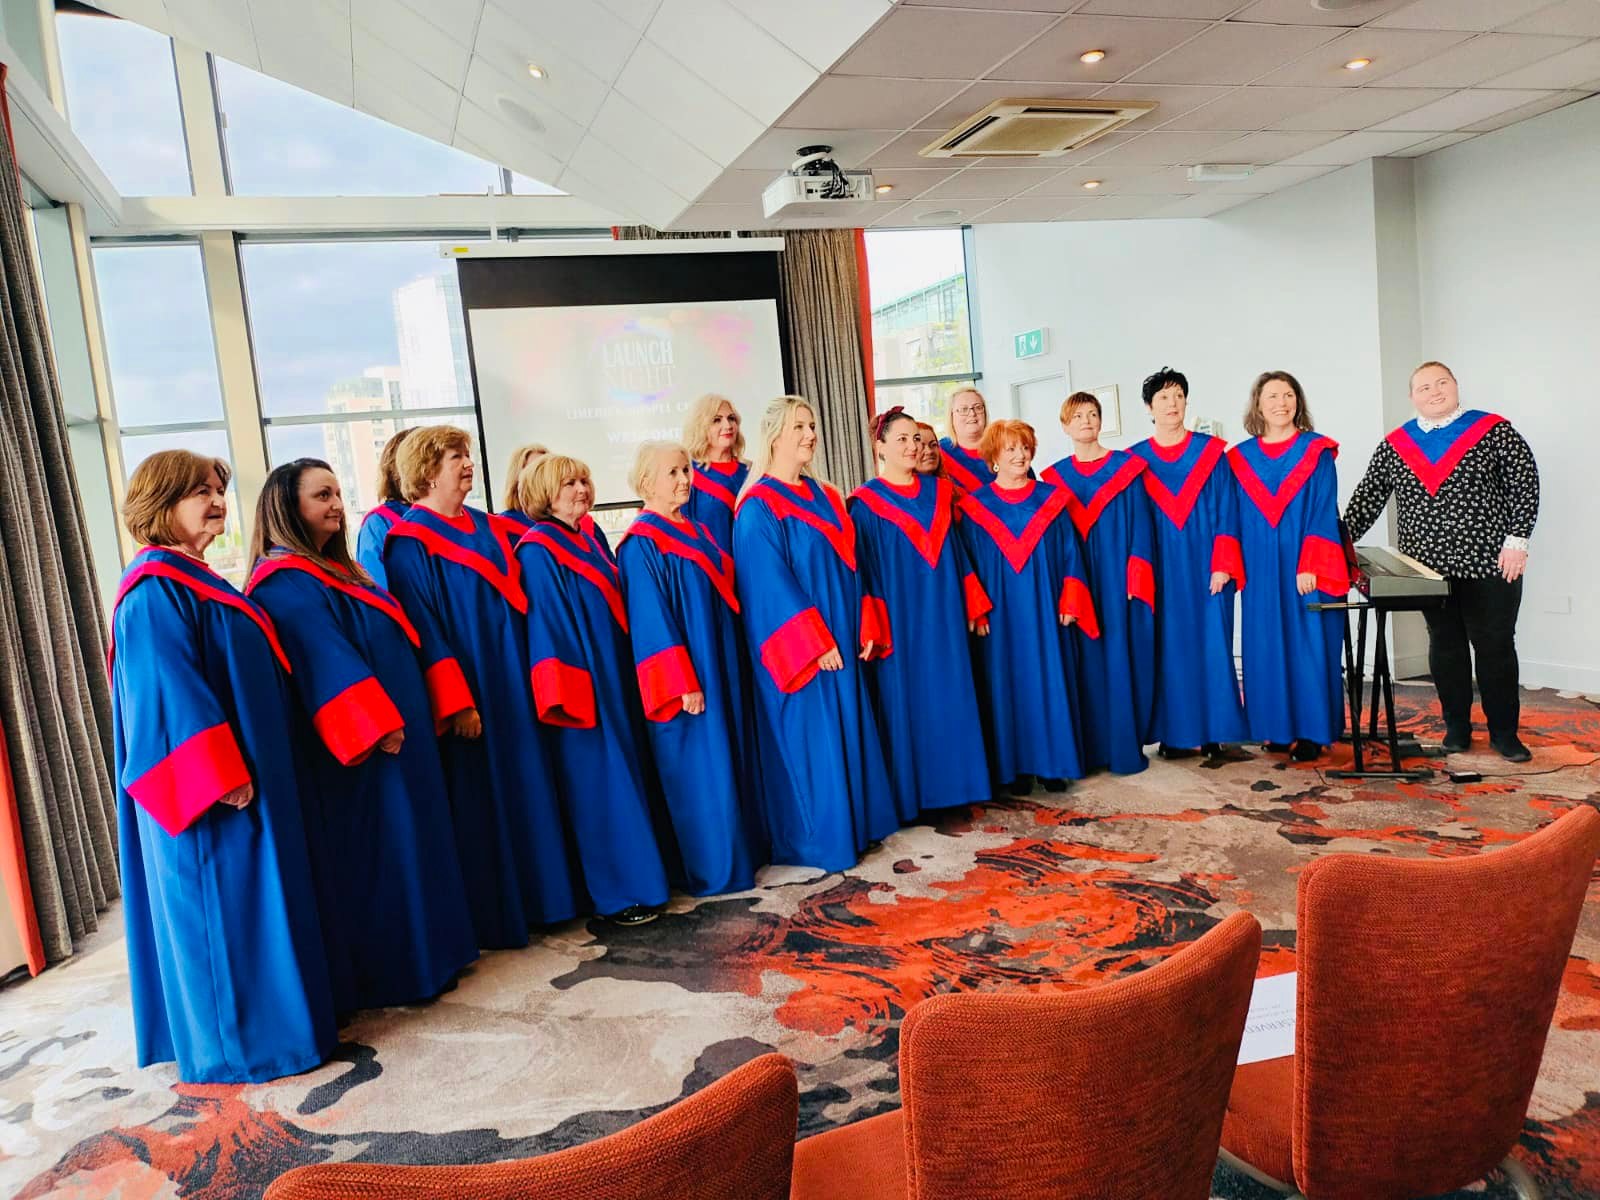 Limerick Gospel Choir Gowns - The choir showcased their new gowns in The Clayton's beautiful Pegasus Suite, surrounded by family and friends with special guest for the evening Deputy Mayor of Limerick City and County, Cllr Tom Ruddle